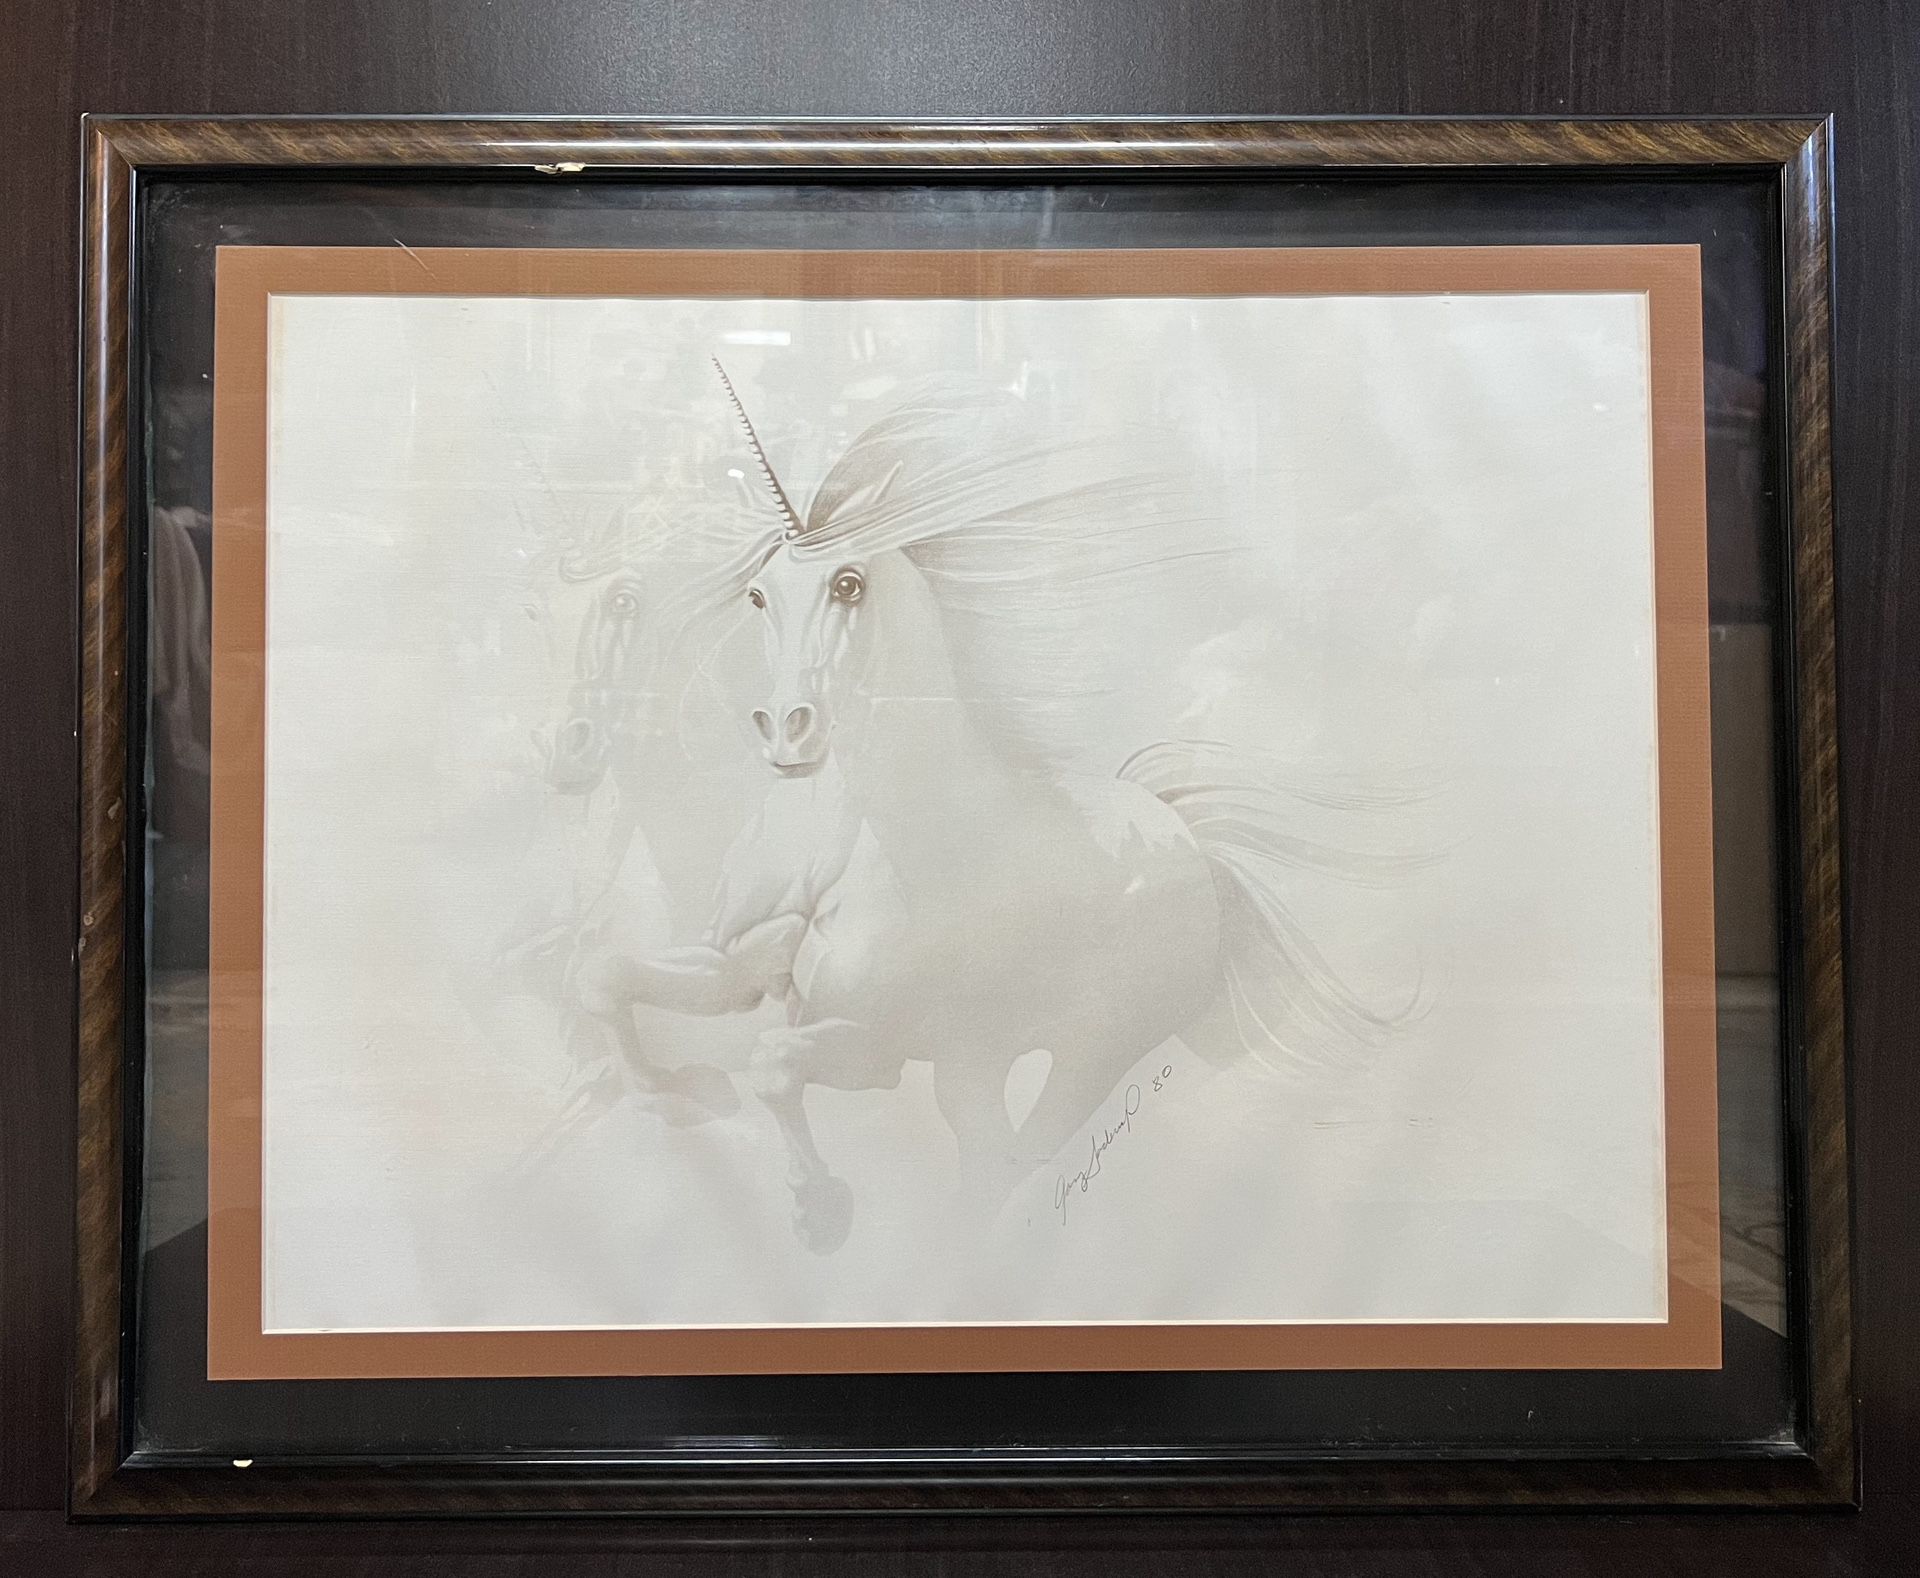 30% Off SALE Vintage 1980 Print of Painting “Unicorn”, Signed, Double-matted, glass-covered on front & back sides, custom Frame